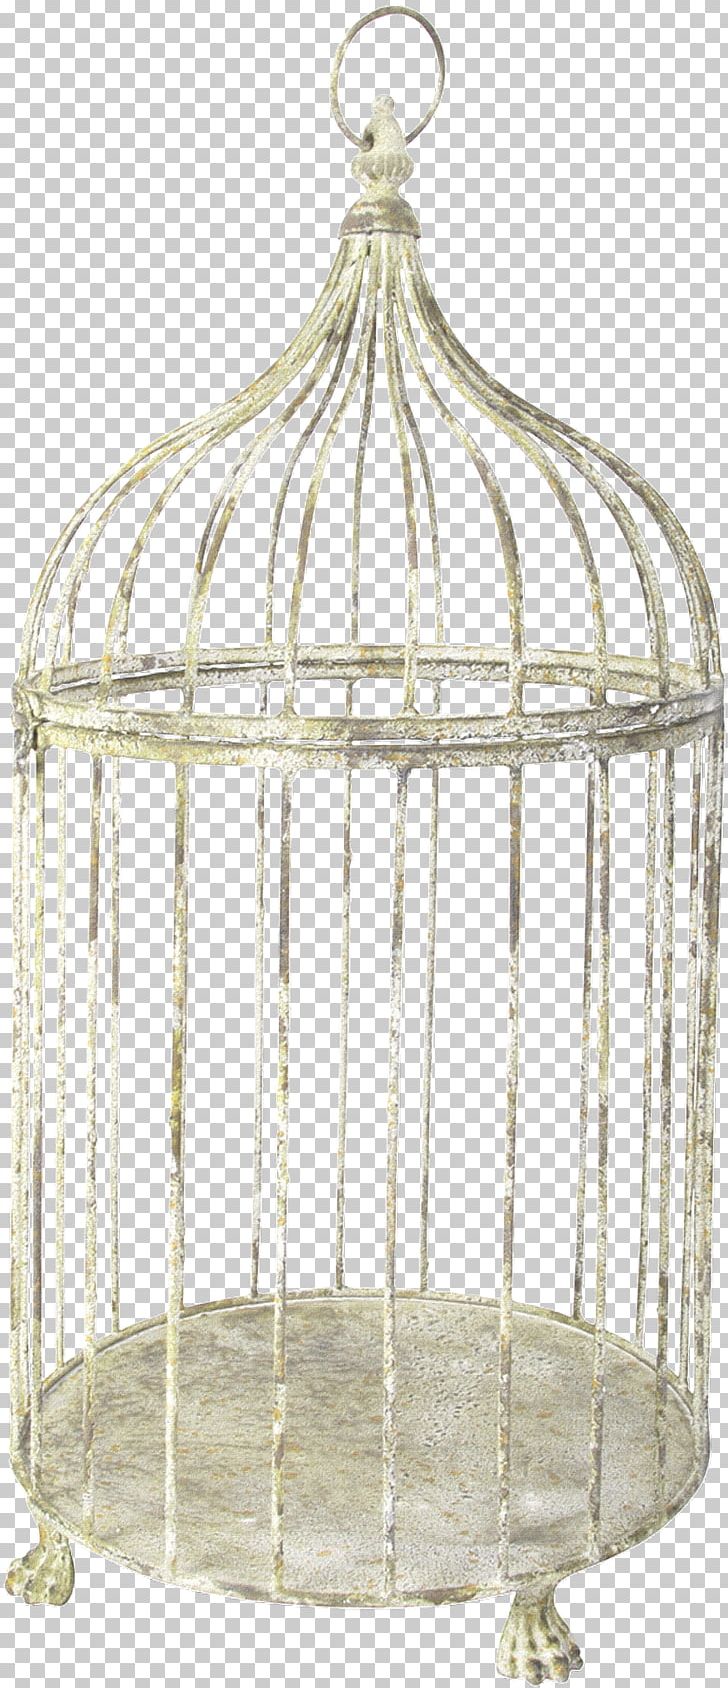 Birdcage Cell PNG, Clipart, Animals, Bird, Birdcage, Cage, Cell Free PNG Download